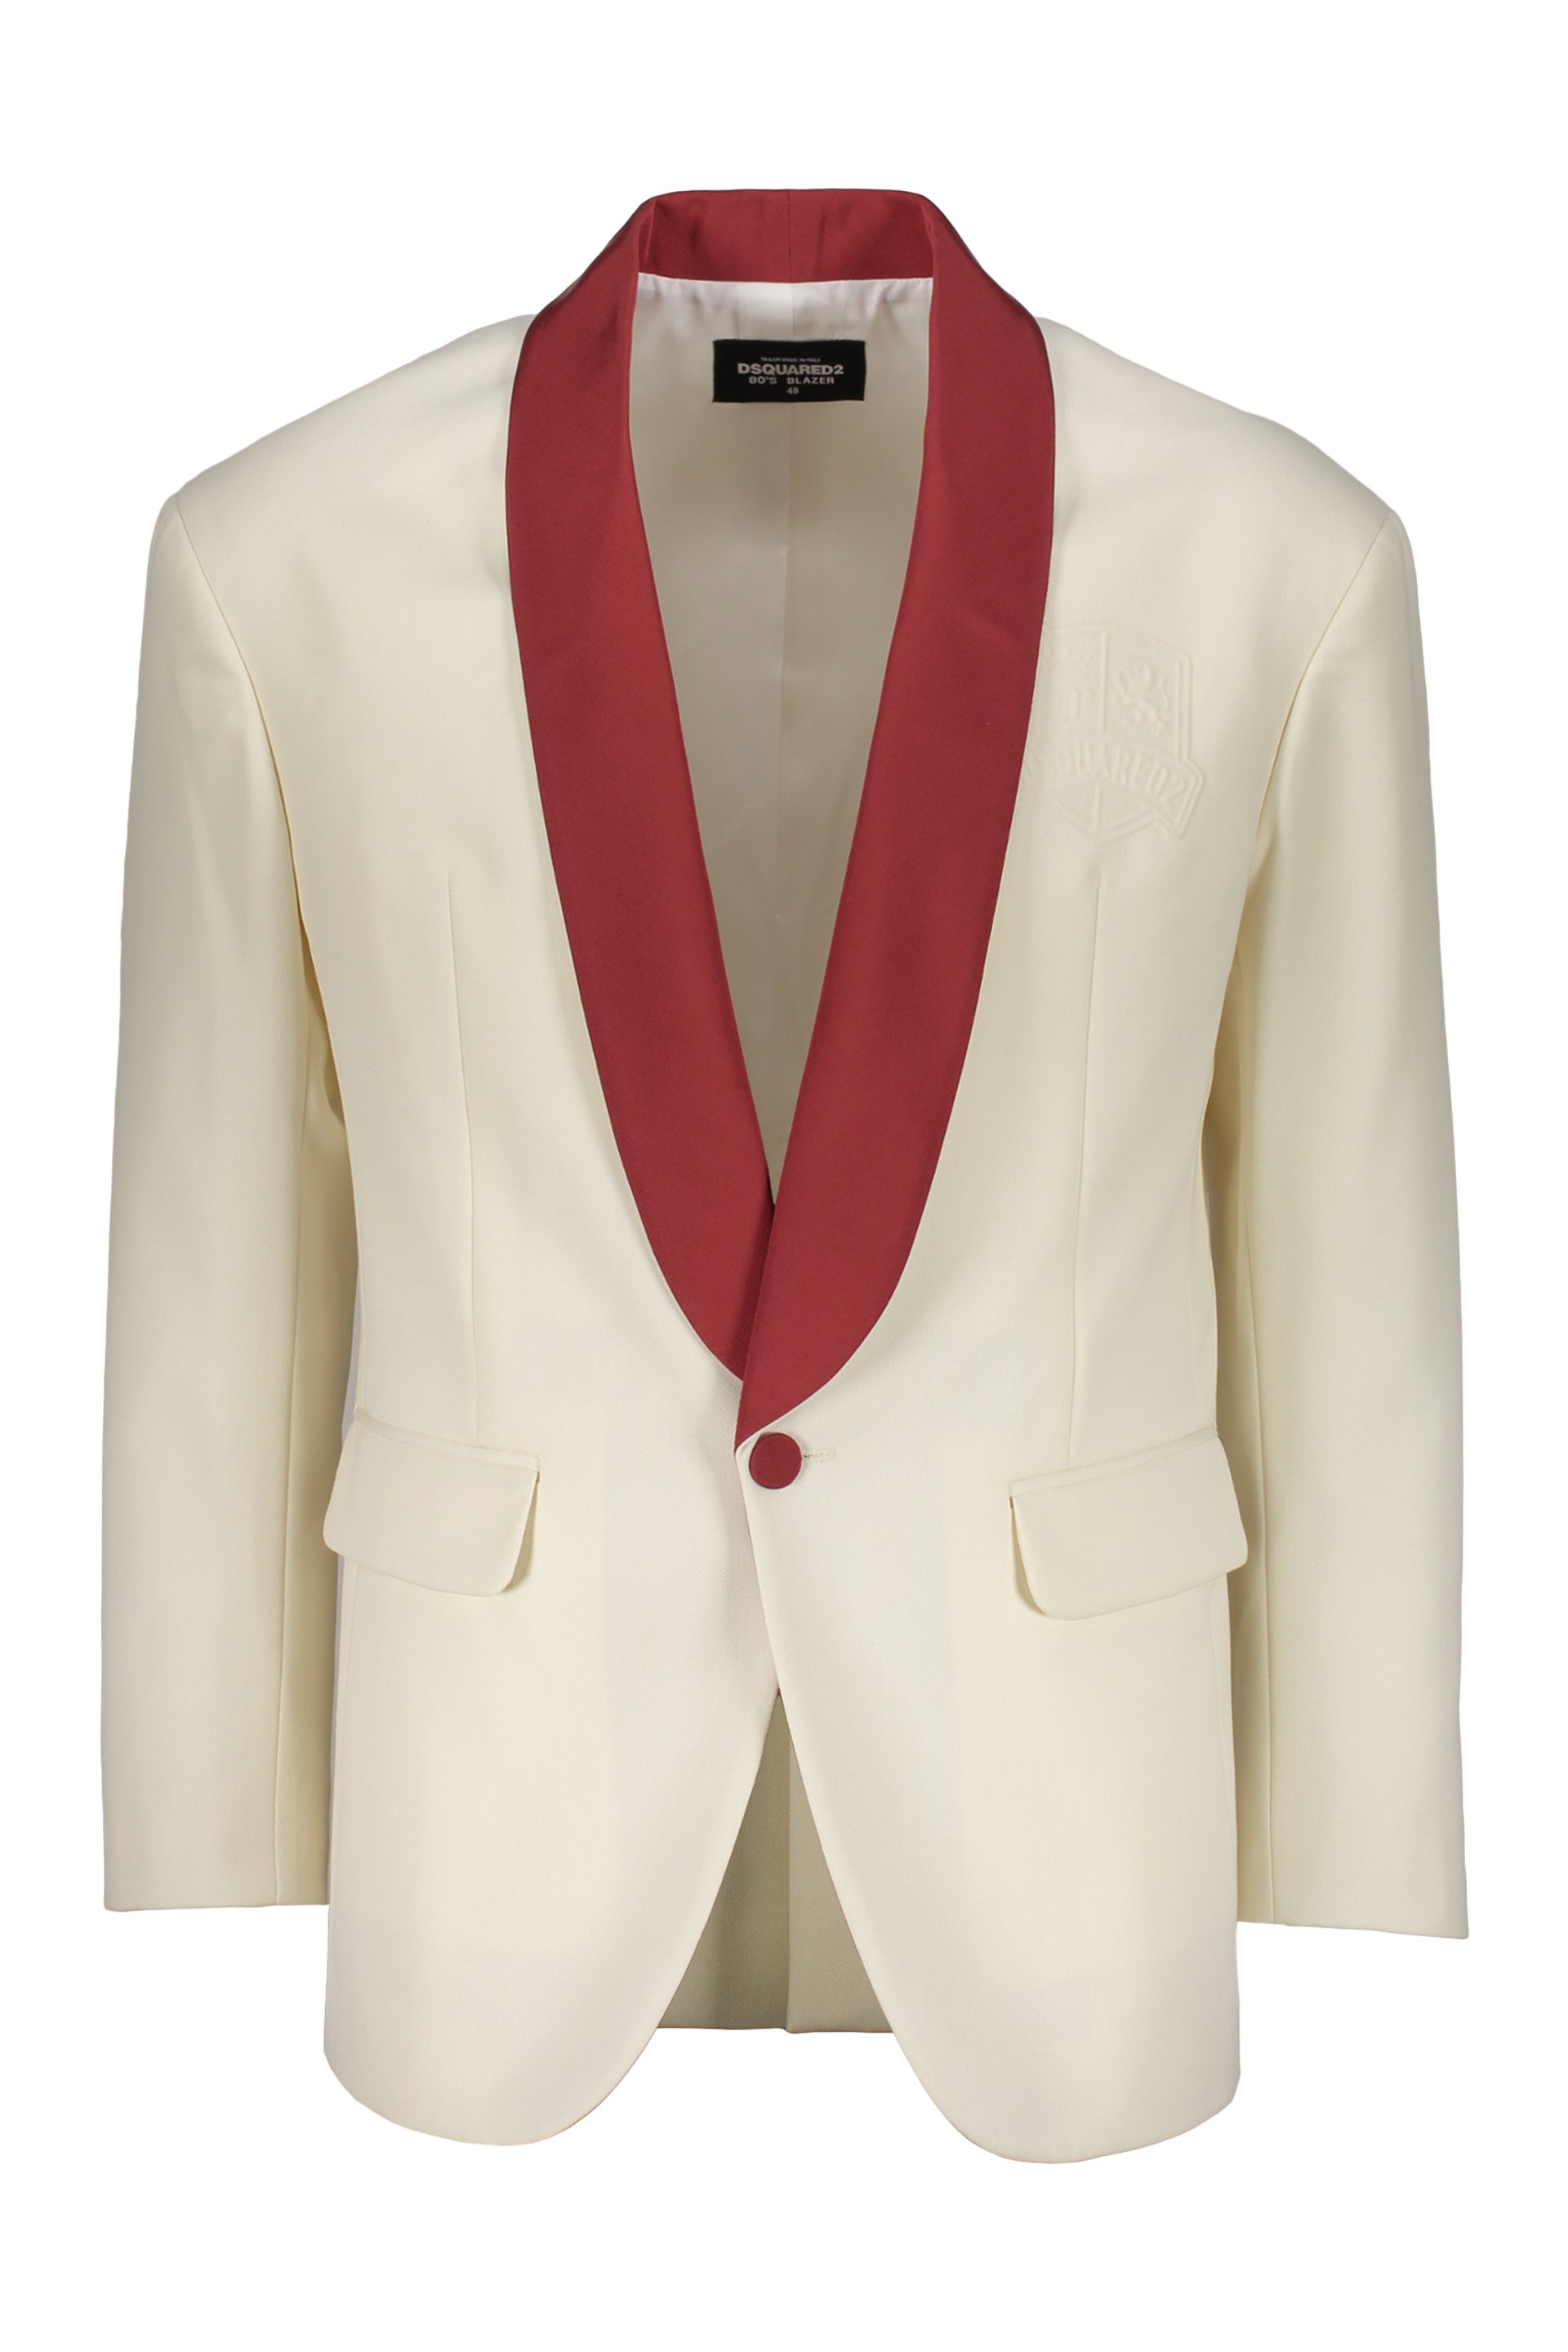 Dsquared2-OUTLET-SALE-Single-breasted-blazer-Jacken-Mantel-48-ARCHIVE-COLLECTION.jpg